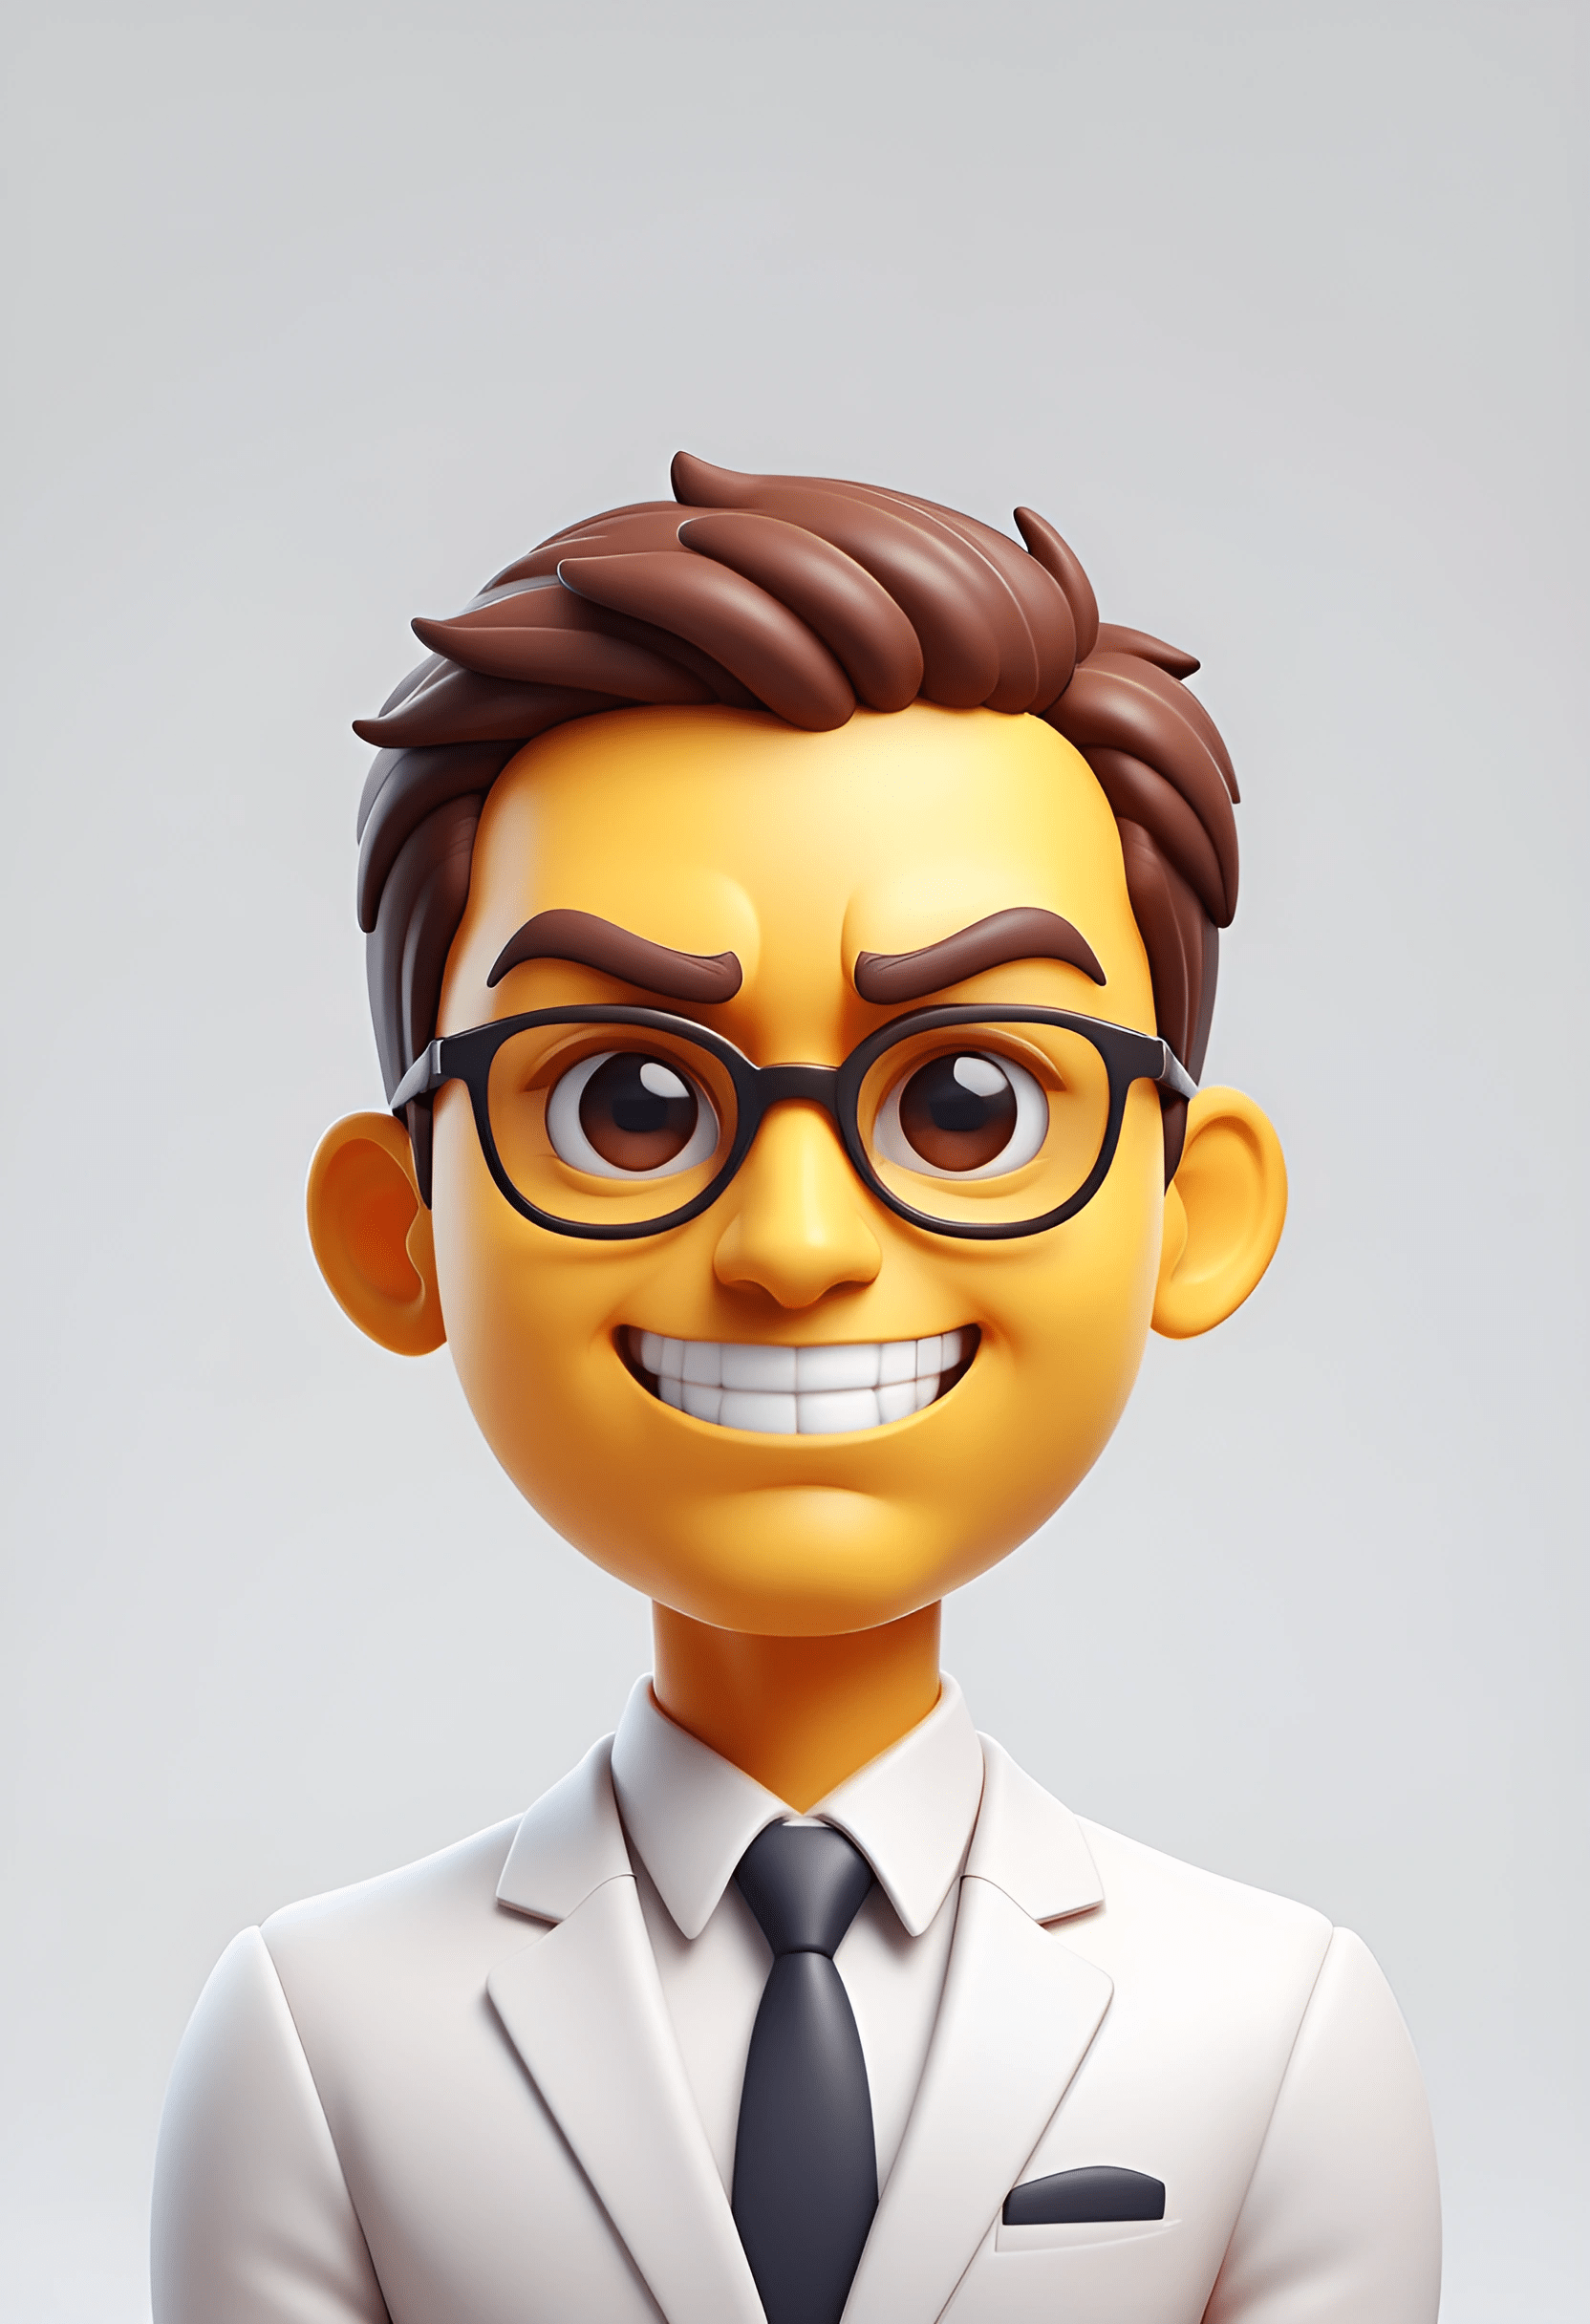 a cartoon character of a man wearing glasses and a suit